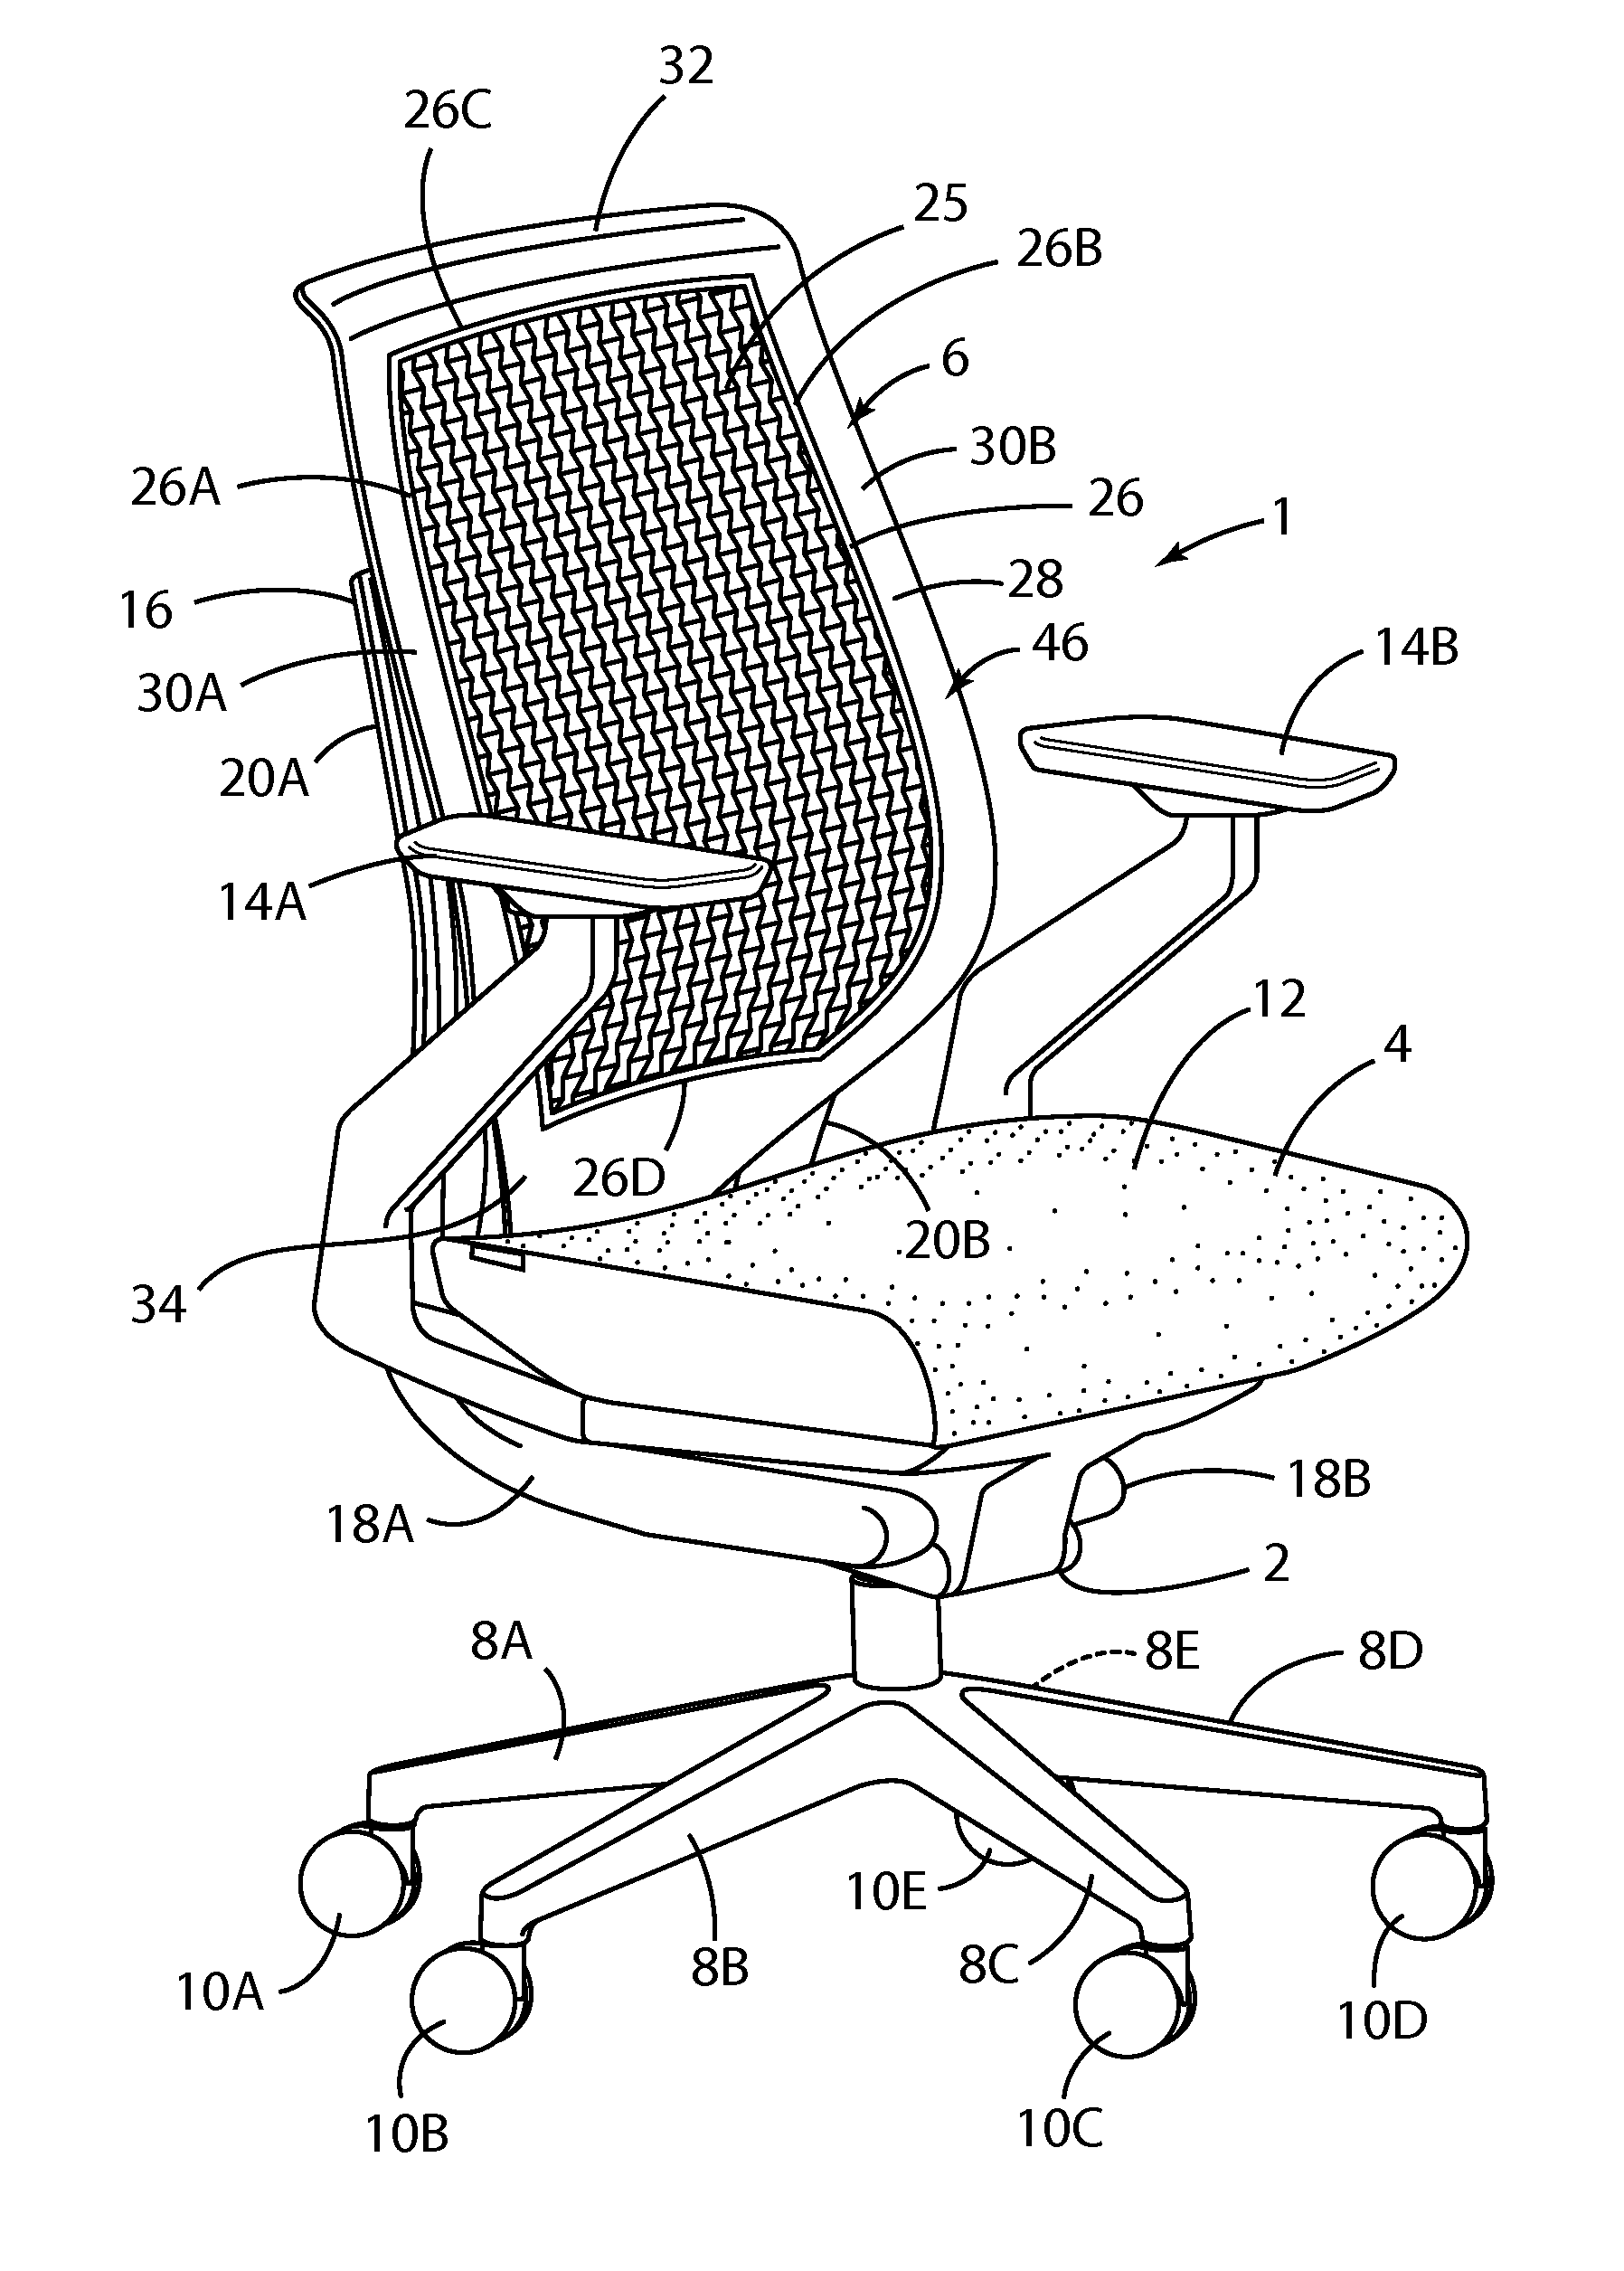 Seating unit with auxetic user support